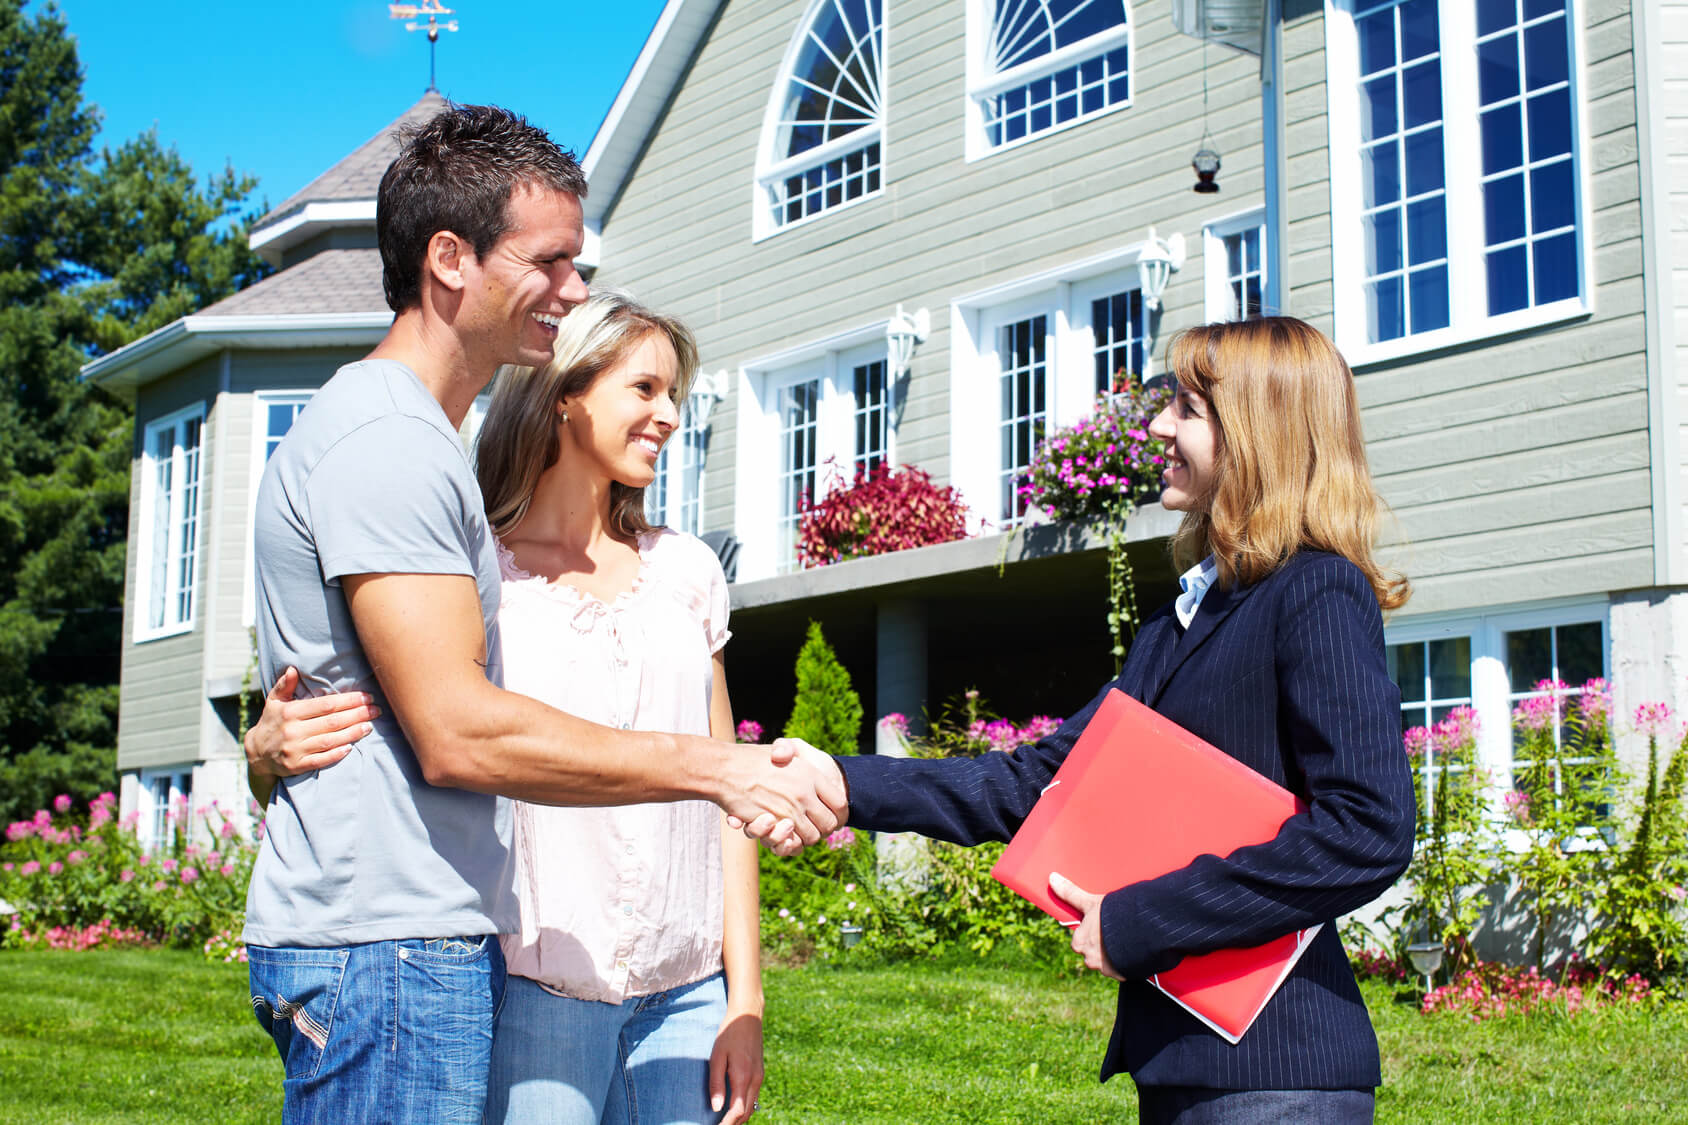 Five steps to becoming a landlord and purchasing your first Investment property